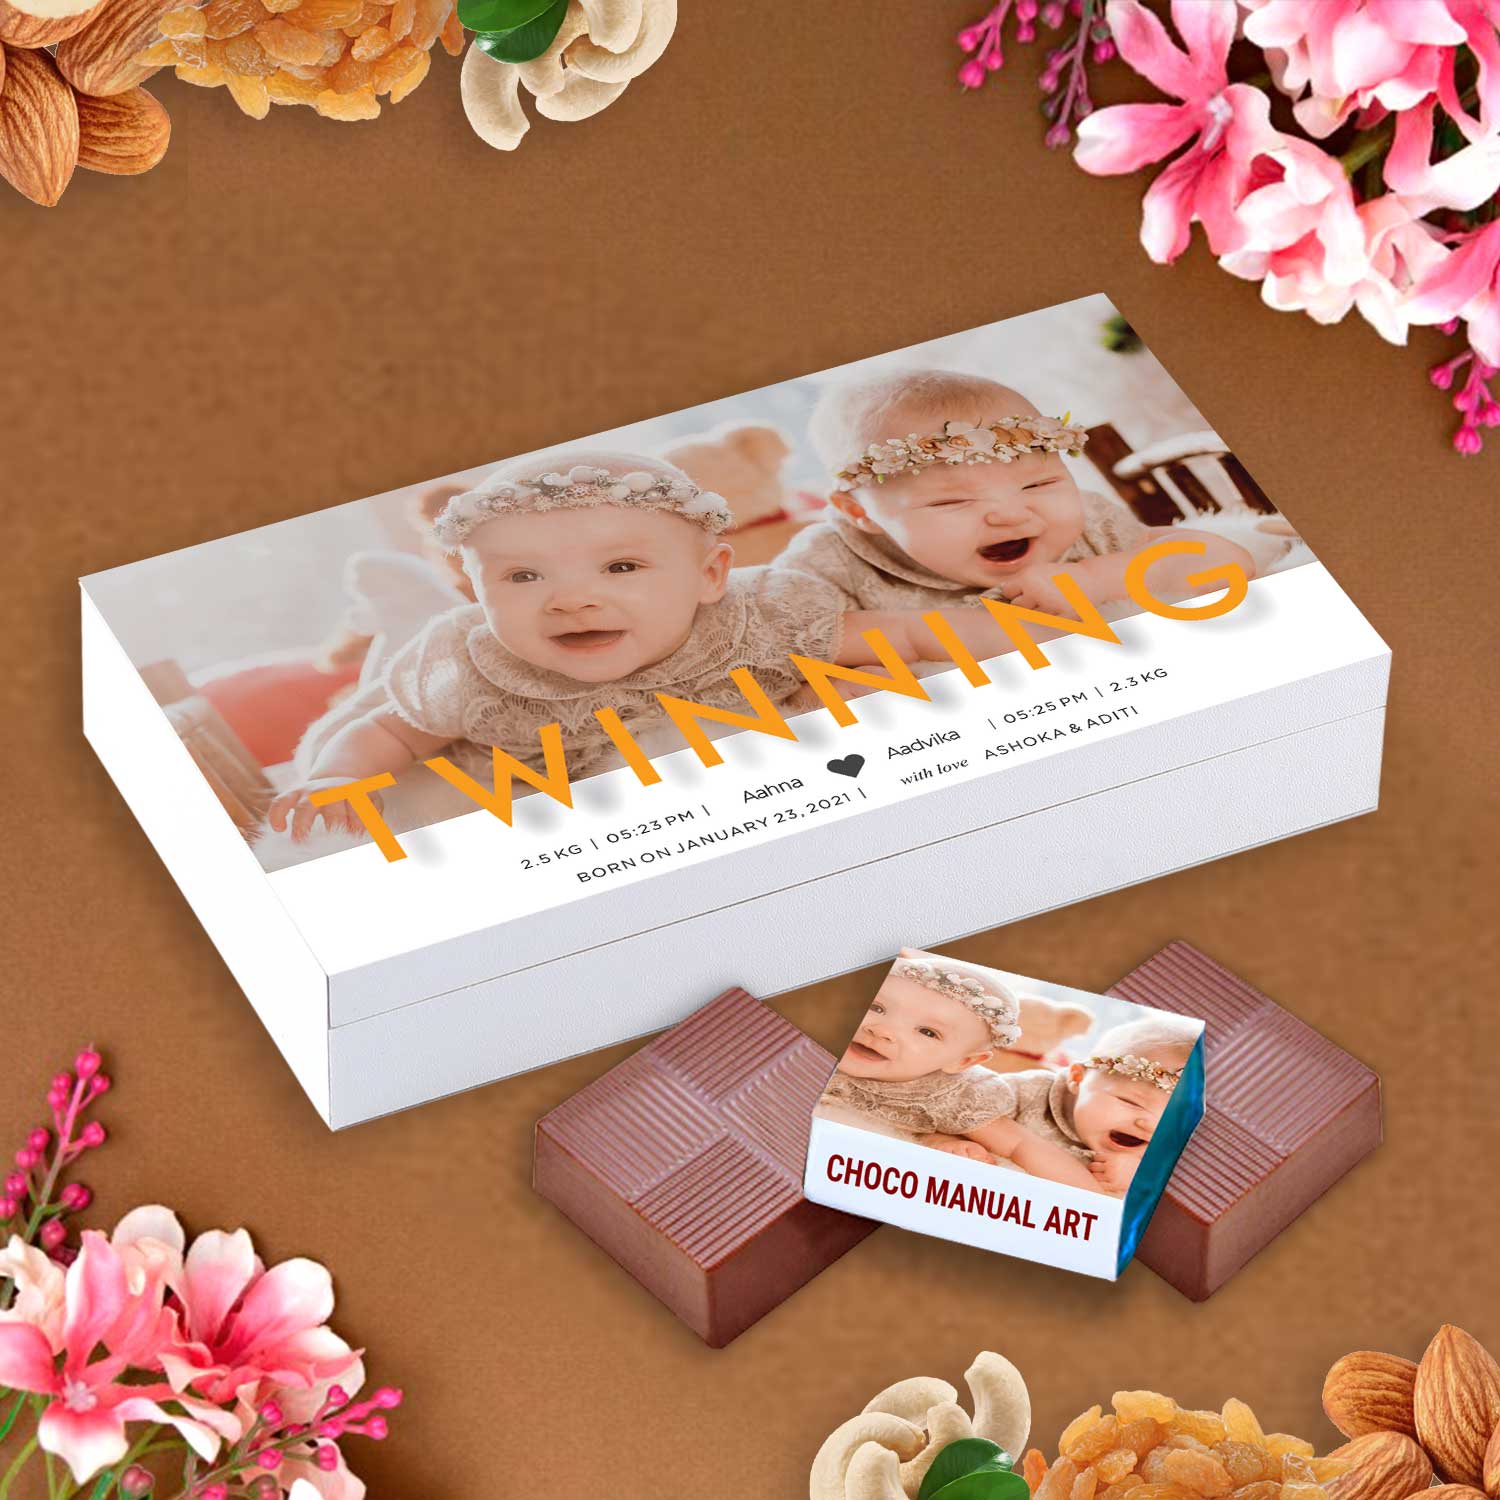 Twin baby birth announcement ideas.  Twins baby announcement.   Twins birth announcement chocolate box india.  Twins birth announcement chocolate box.